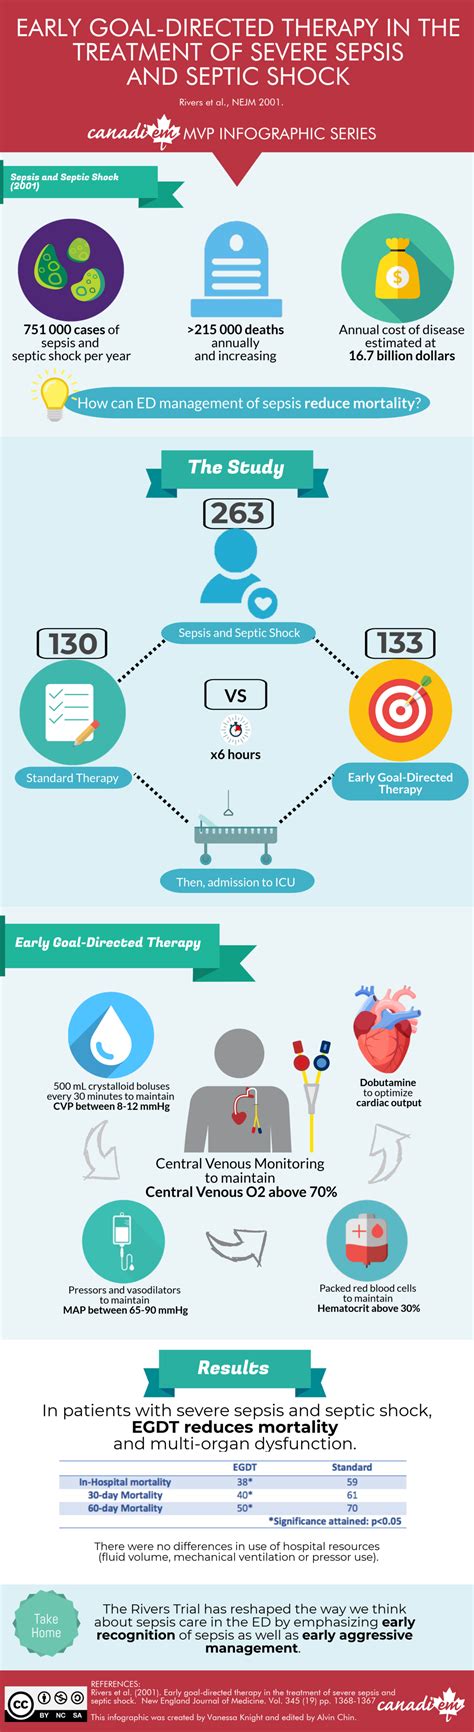 Canadiem Mvp Infographic Series Early Goal Directed Therapy In The Treatment Of Sepsis Canadiem